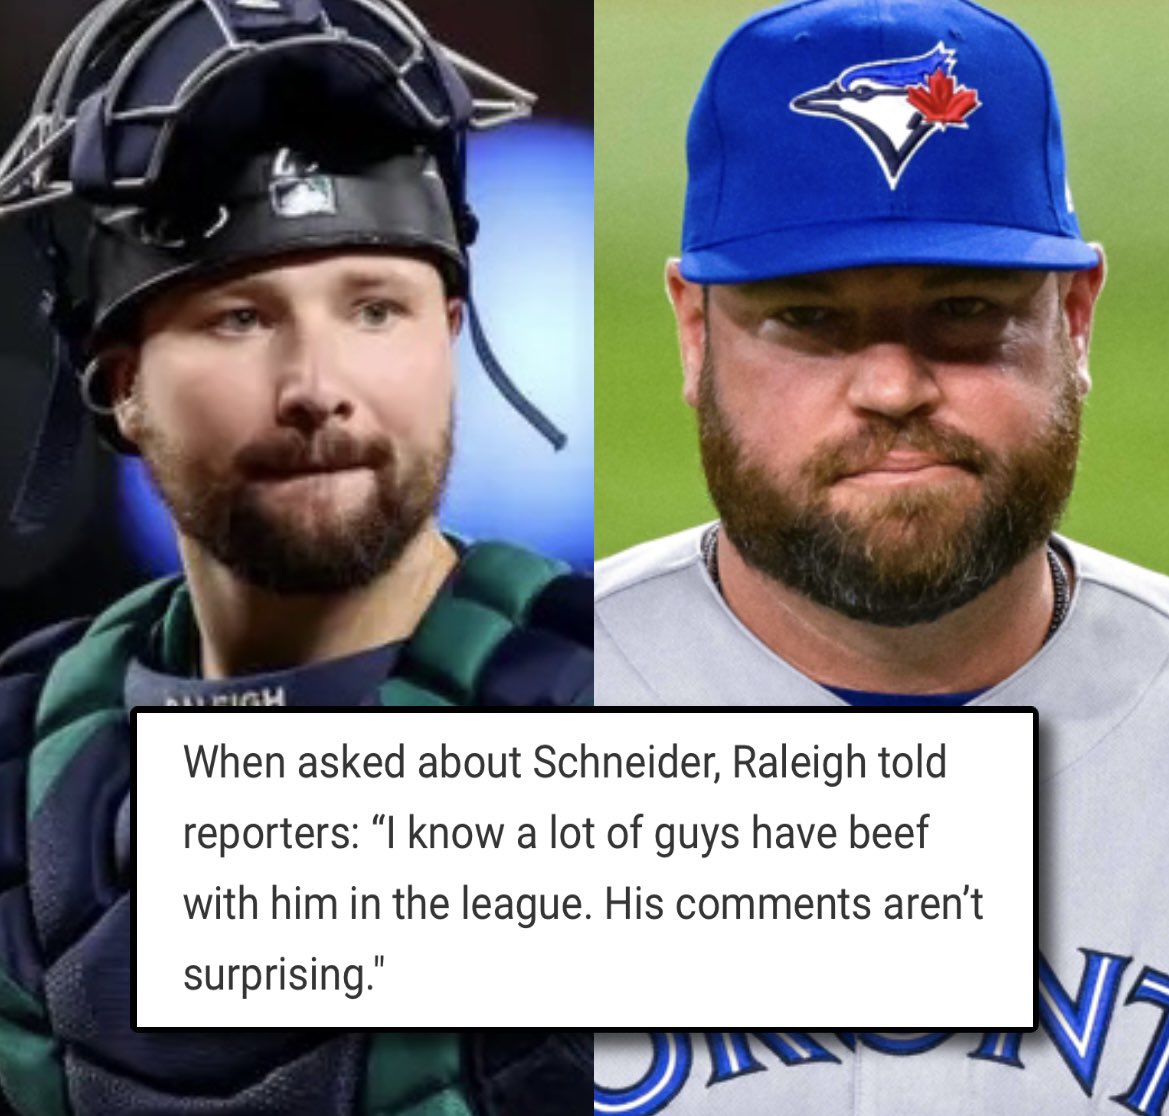 Cal Raleigh says “a lot of guys have beef with (John Schneider) in the league”. 

This is after Schneider said last April that Raleigh is “not very tough to pitch to”. 

Raleigh has 9 homers in 15 games against the Blue Jays.

#TorontoBlueJays #SeattleMariners